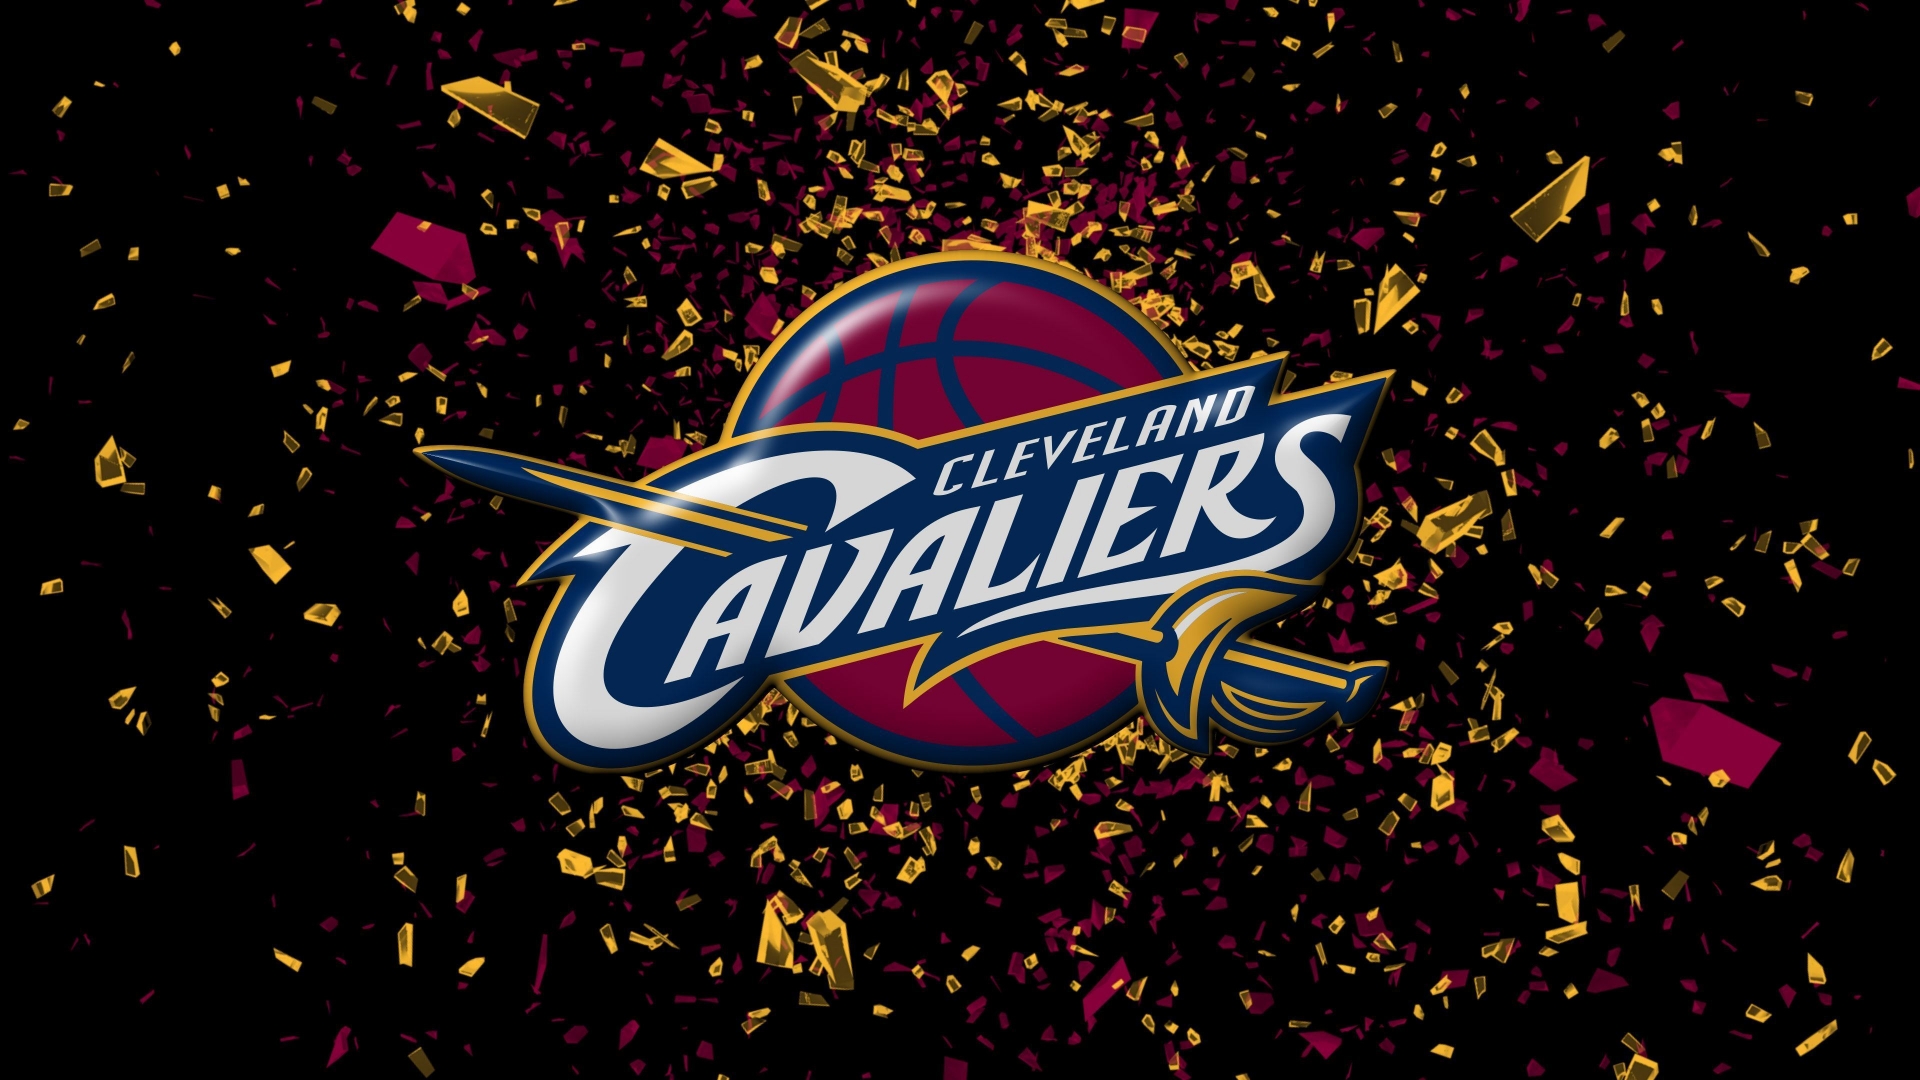 Cleveland Cavaliers for 1920 x 1080 HDTV 1080p resolution